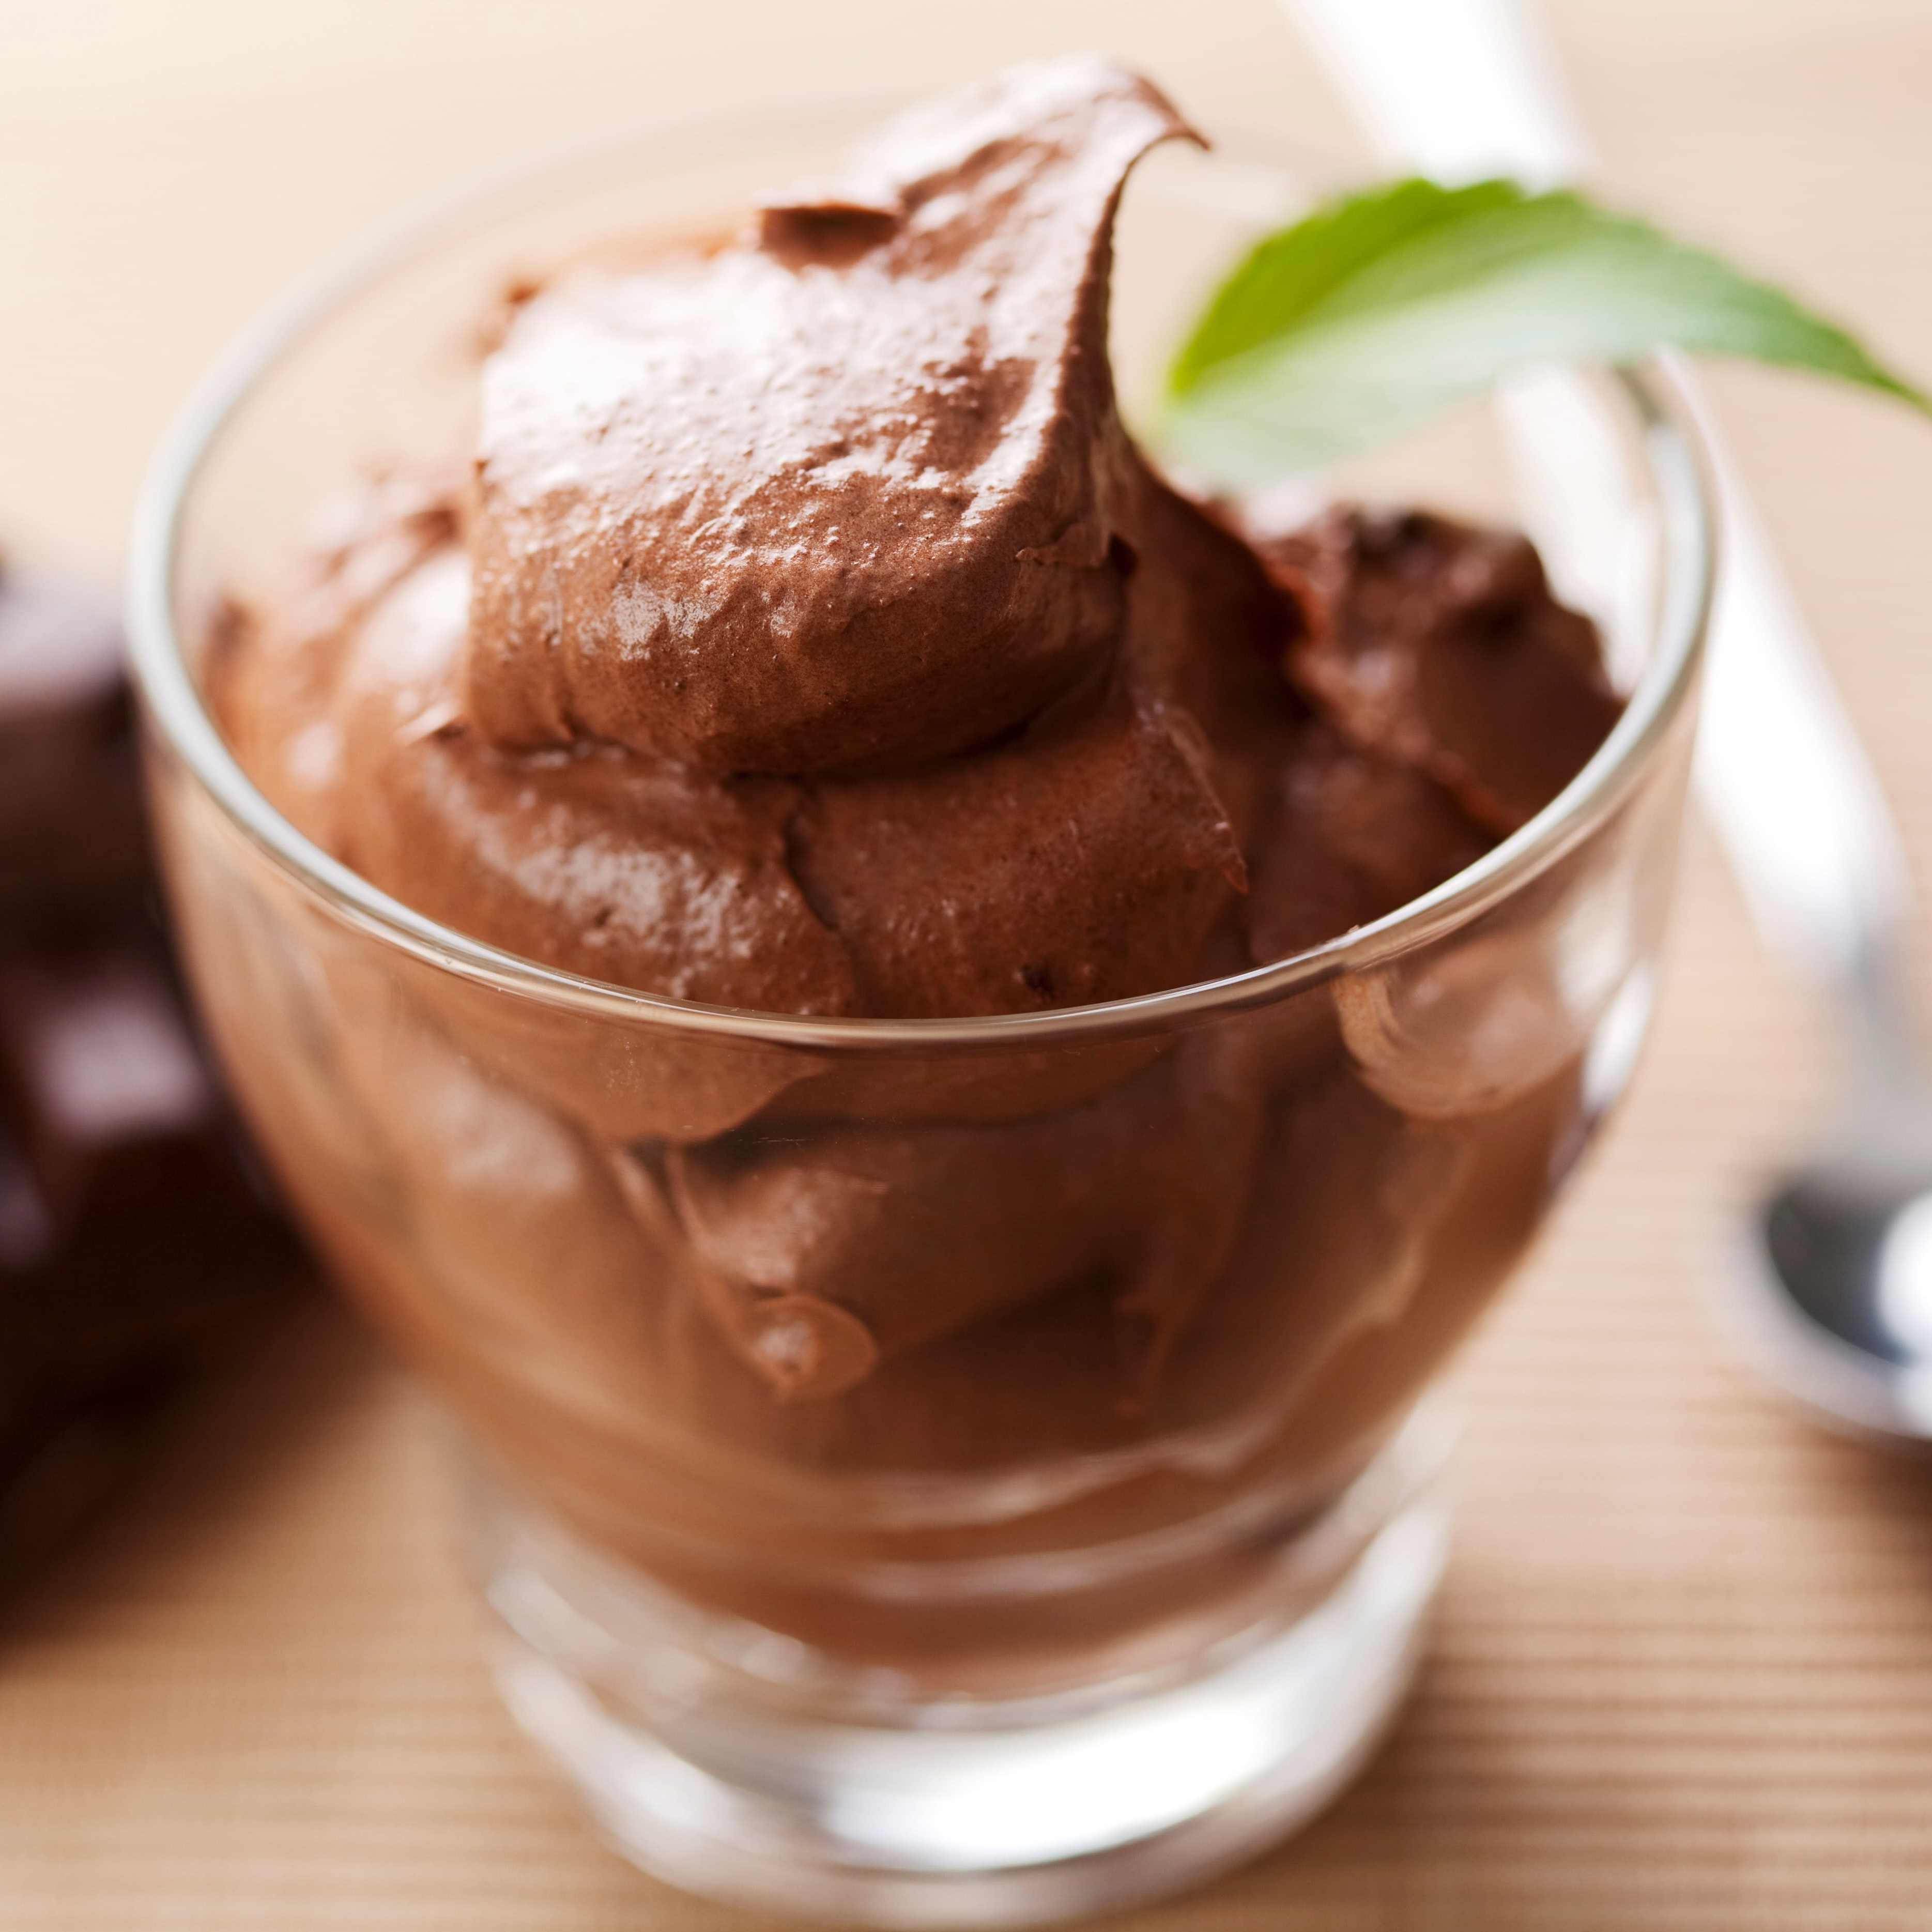 Chocolate pudding or mousse 